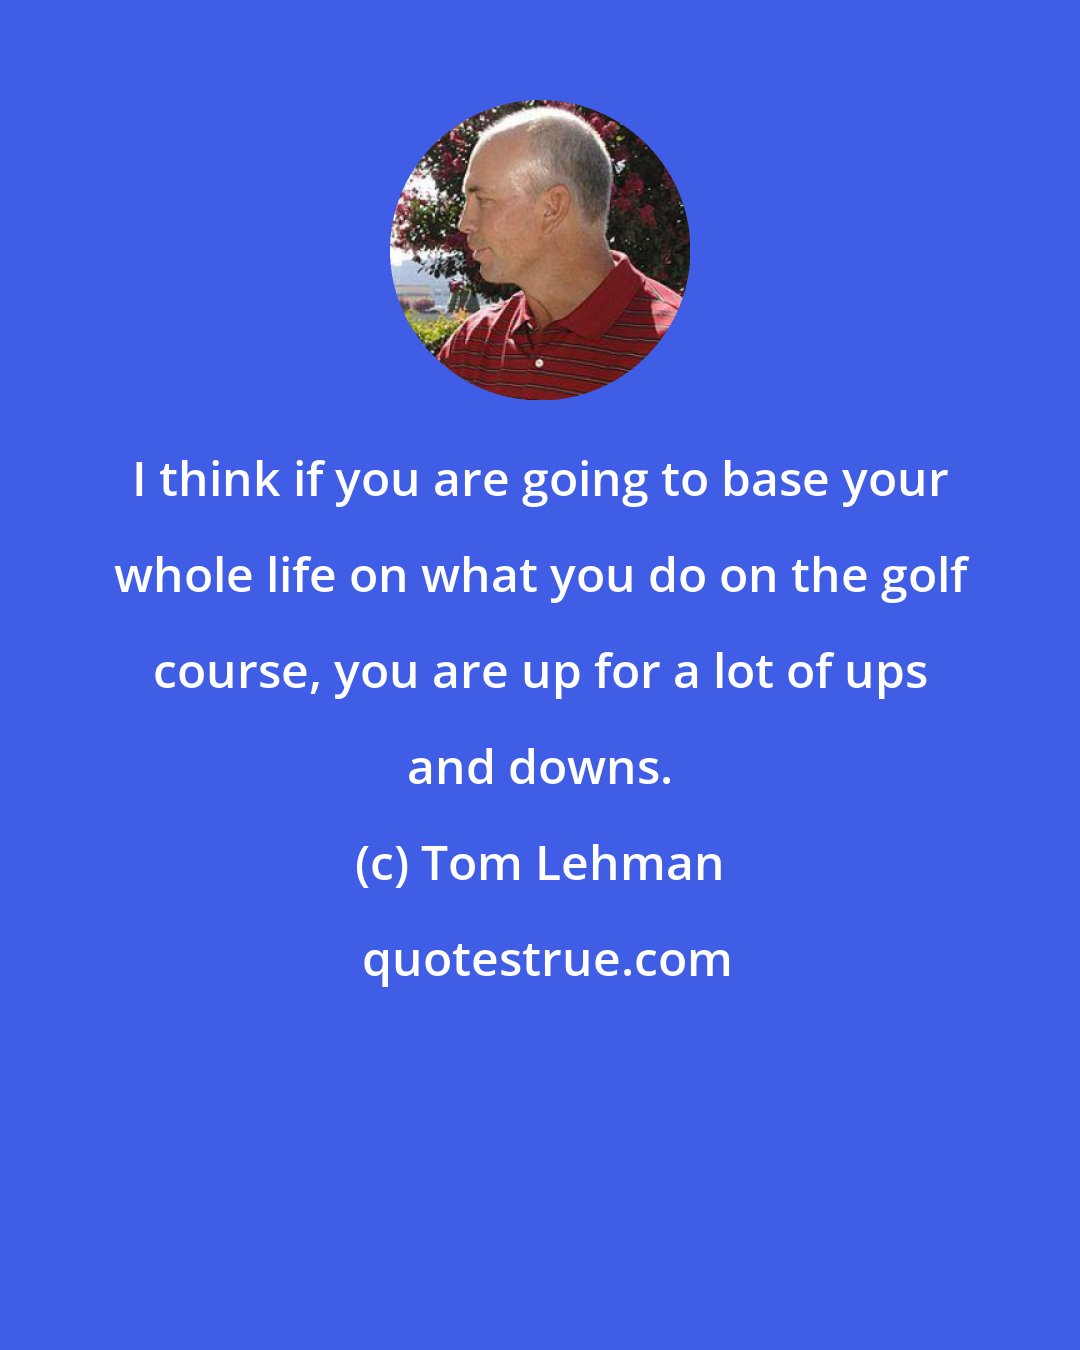 Tom Lehman: I think if you are going to base your whole life on what you do on the golf course, you are up for a lot of ups and downs.